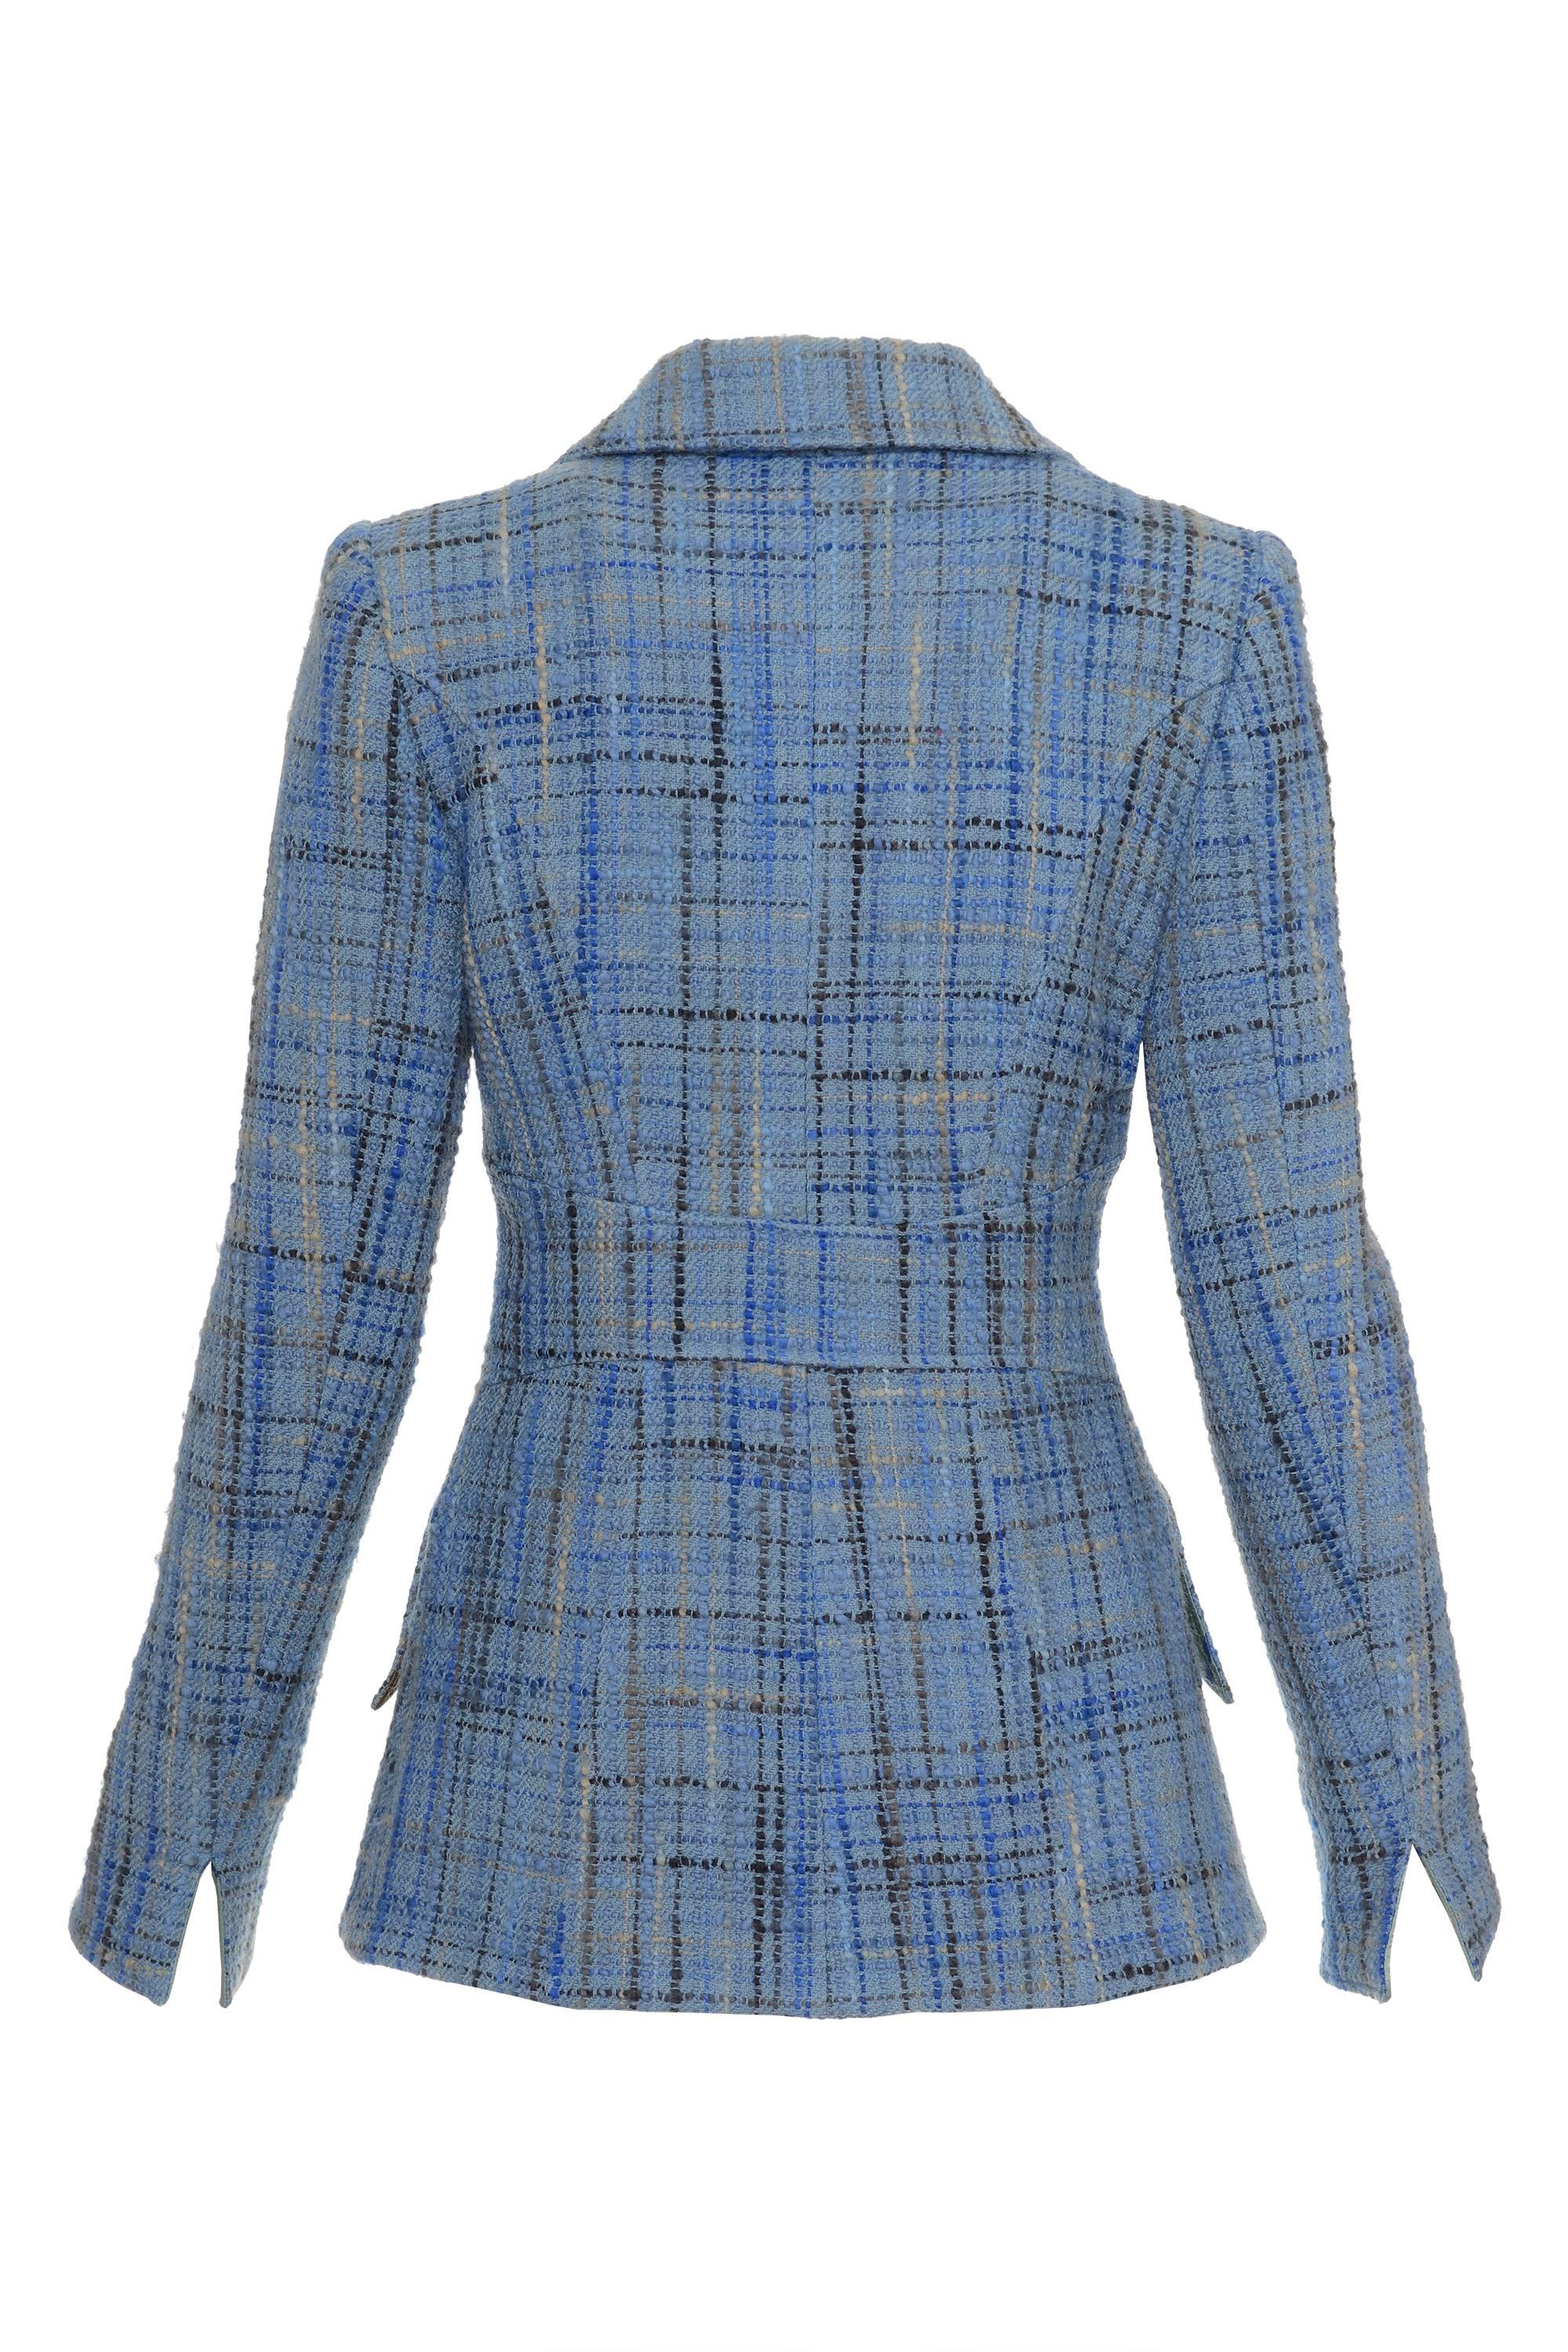 This blue winter check tweed blazer Jacket by CHRISTIAN LACROIX has two frontal slashed pockets with flap, double-breasted closure using six buttons embossed and laminated tailor seam, two-pieces sleeves, back armhole princess seam and an horizontal